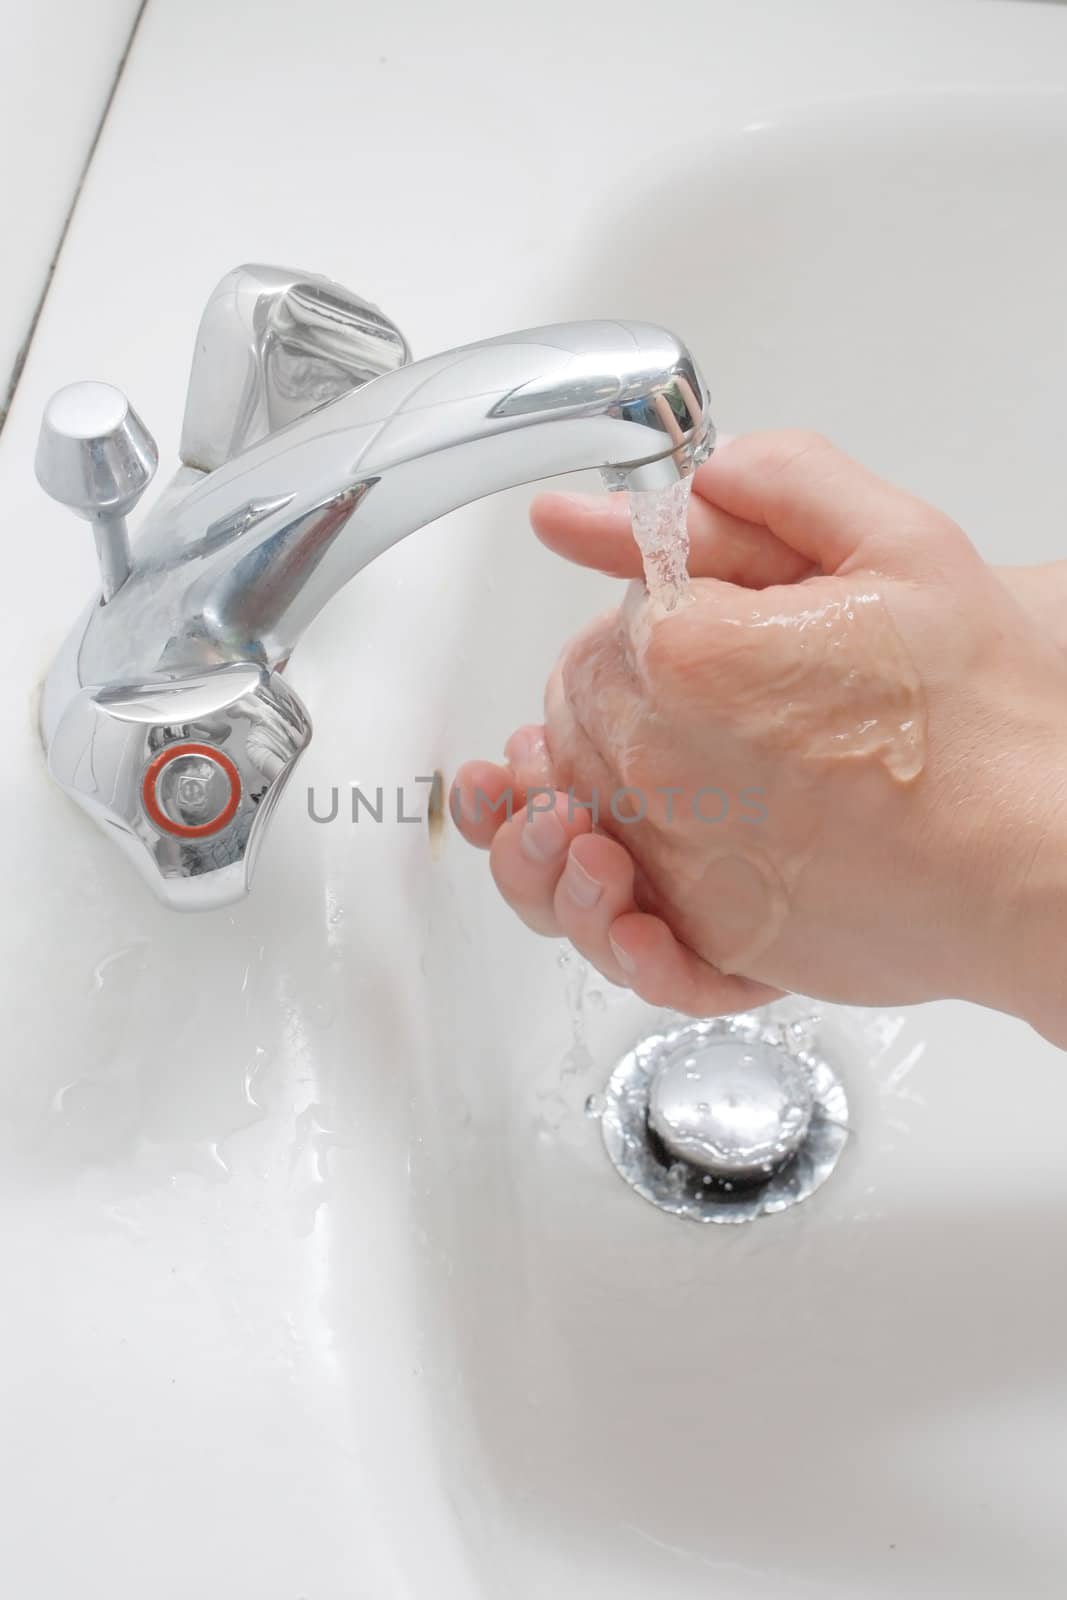 Washing hands by leeser